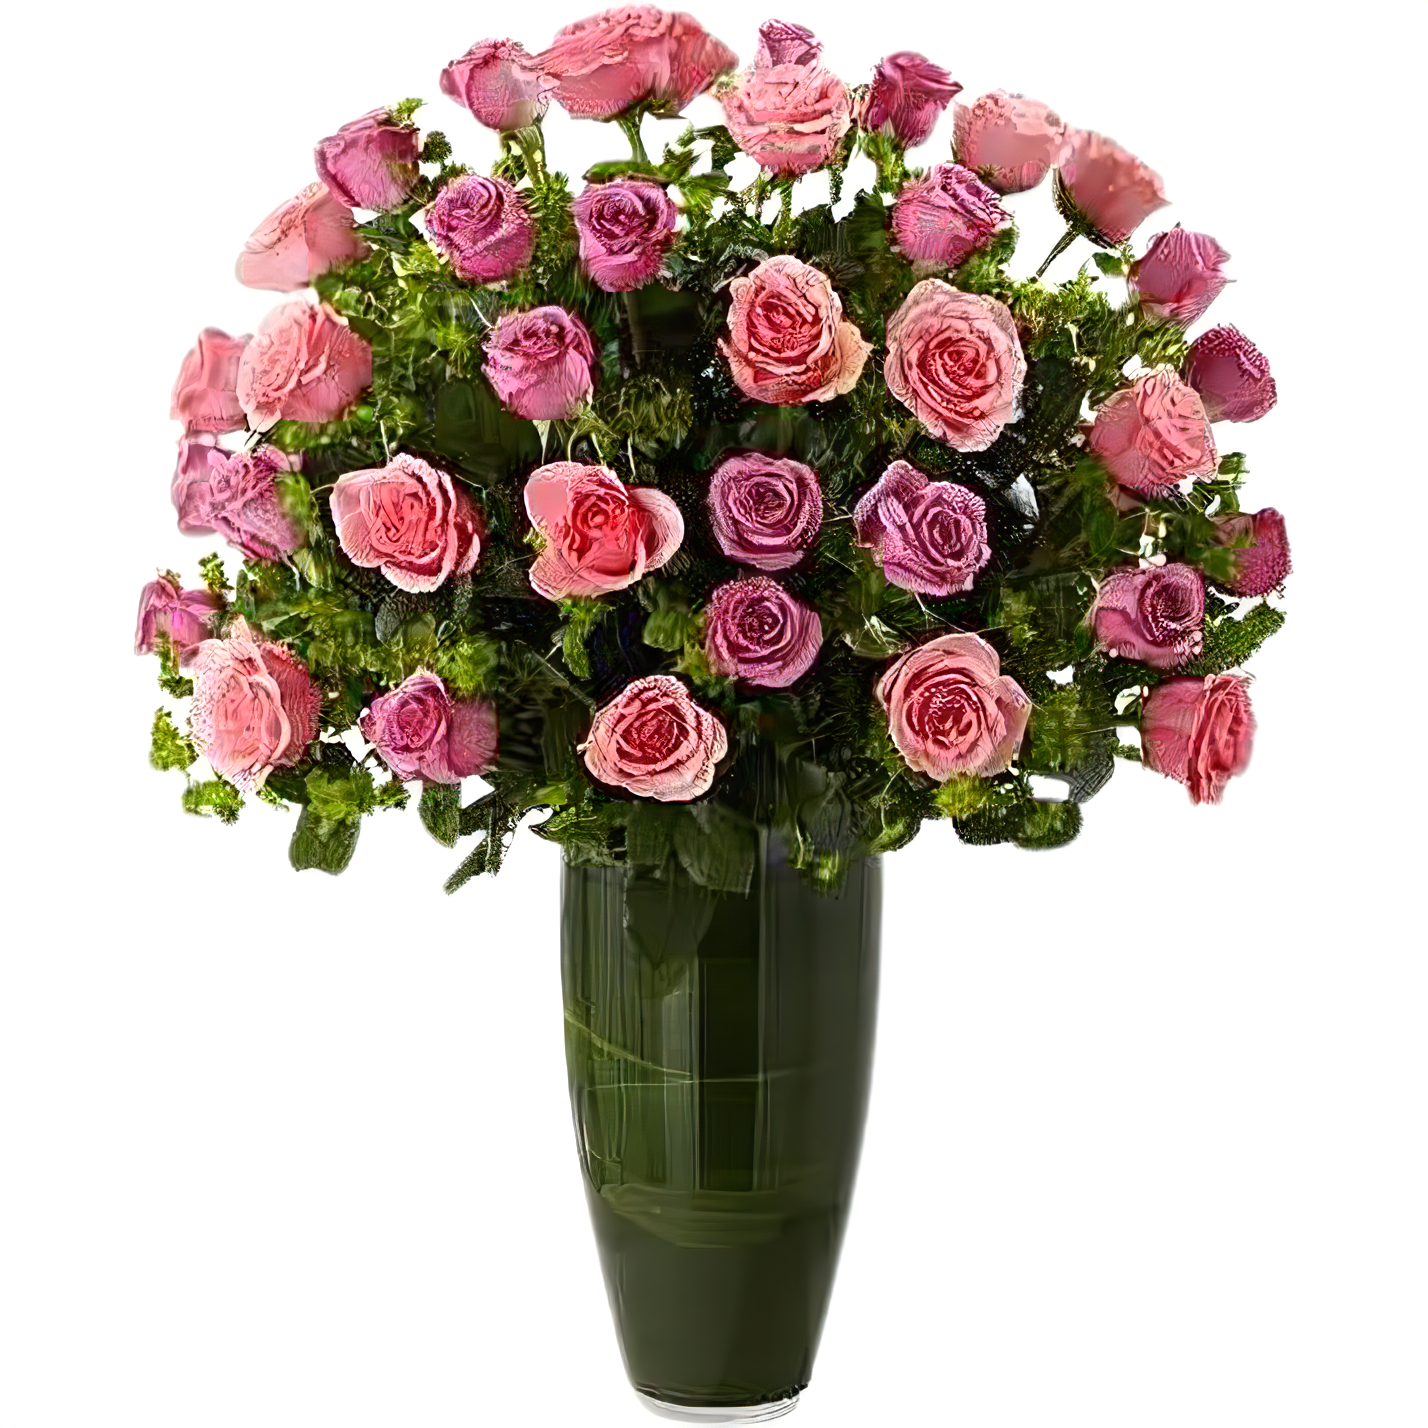 Luxury Rose Bouquet - 24 Premium Pink & Lavender Long-Stem Roses - Products > Luxury Collection